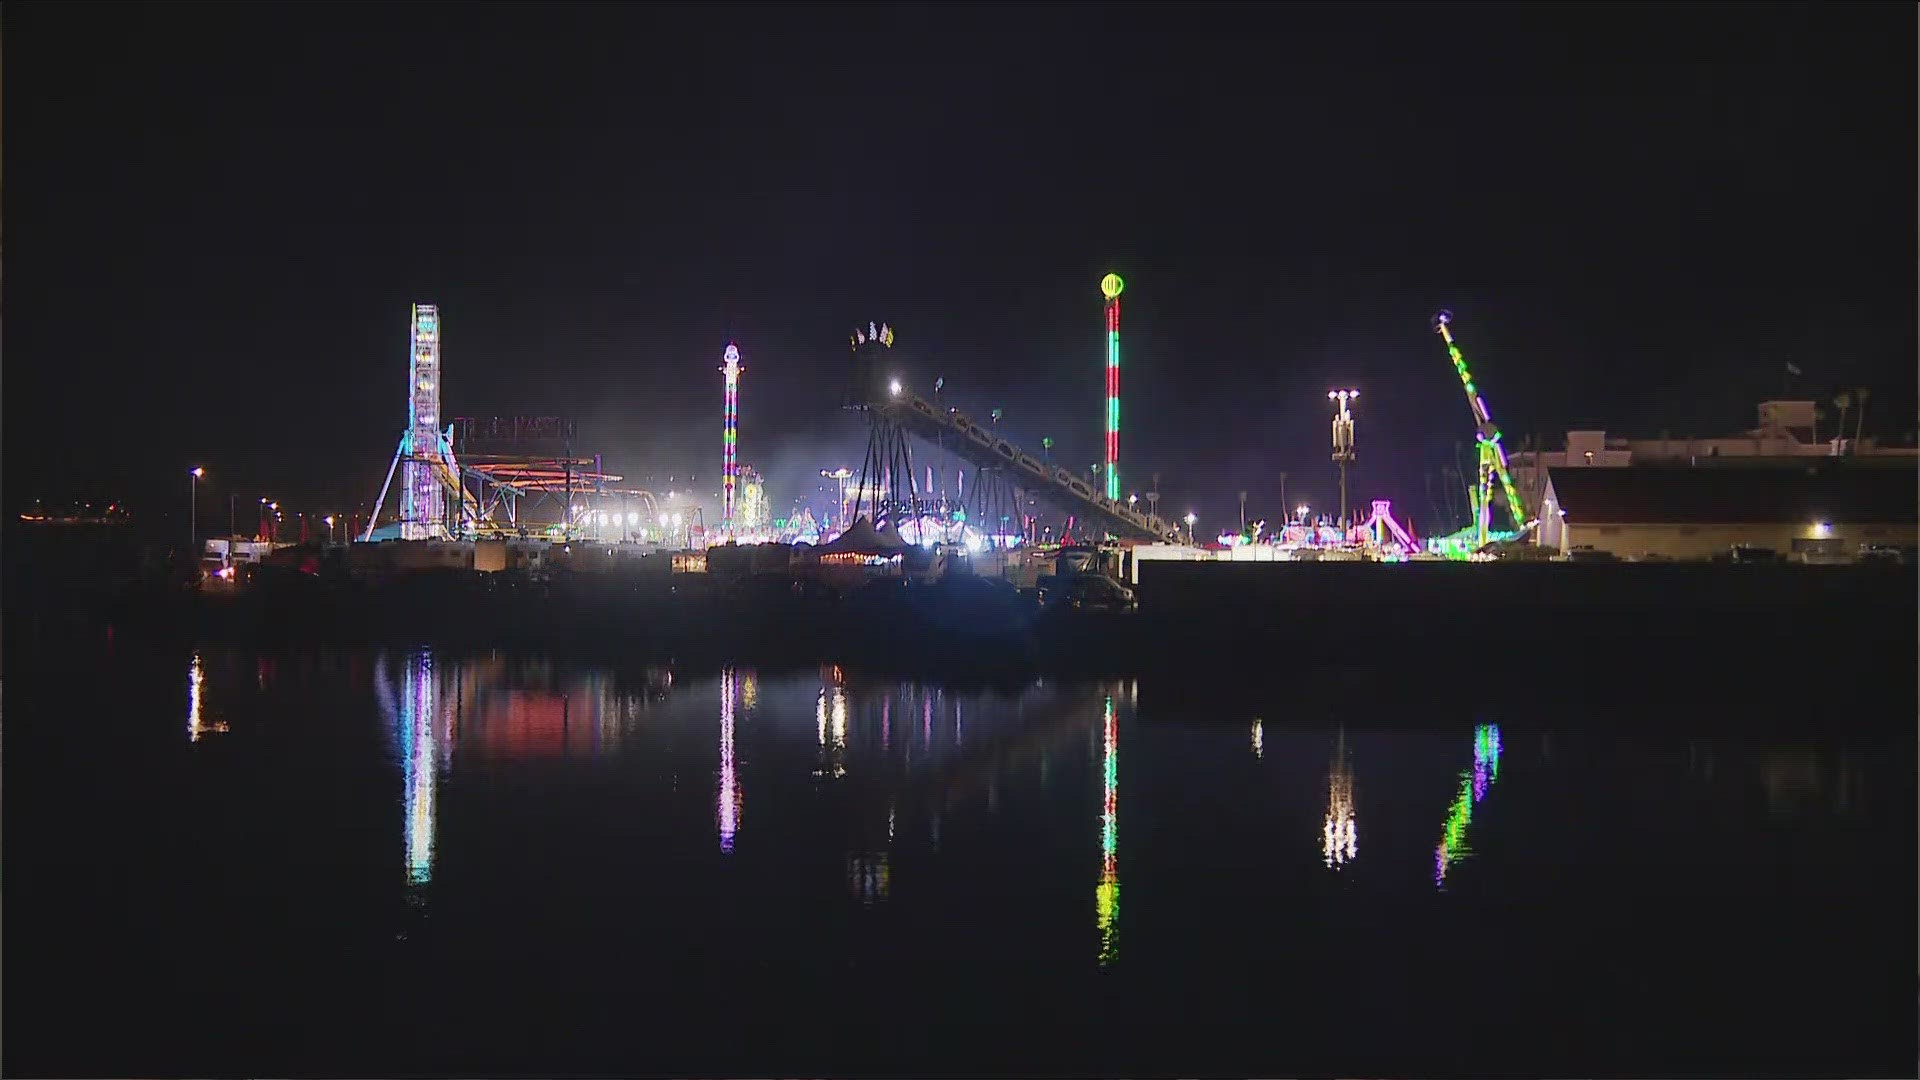 CBS 8 photojournalist Todd Ward went to the fairgrounds to capture the fun, food and excitement at the first night of the San Diego County Fair.